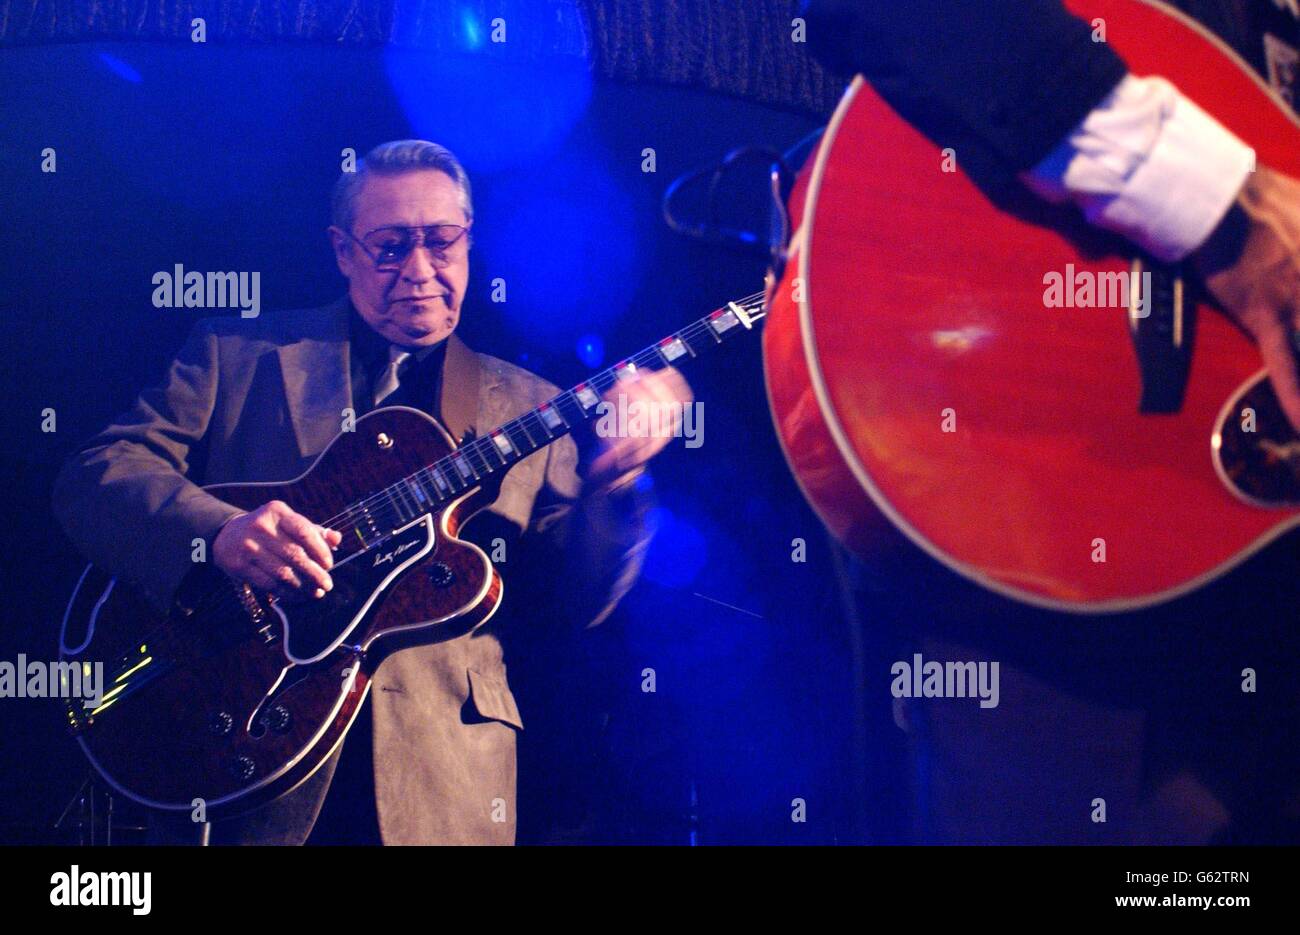 The legendary Scotty Moore - who played in Elvis's backing band - plays a set with Darren Day at Cafe de Paris in central London. Stock Photo